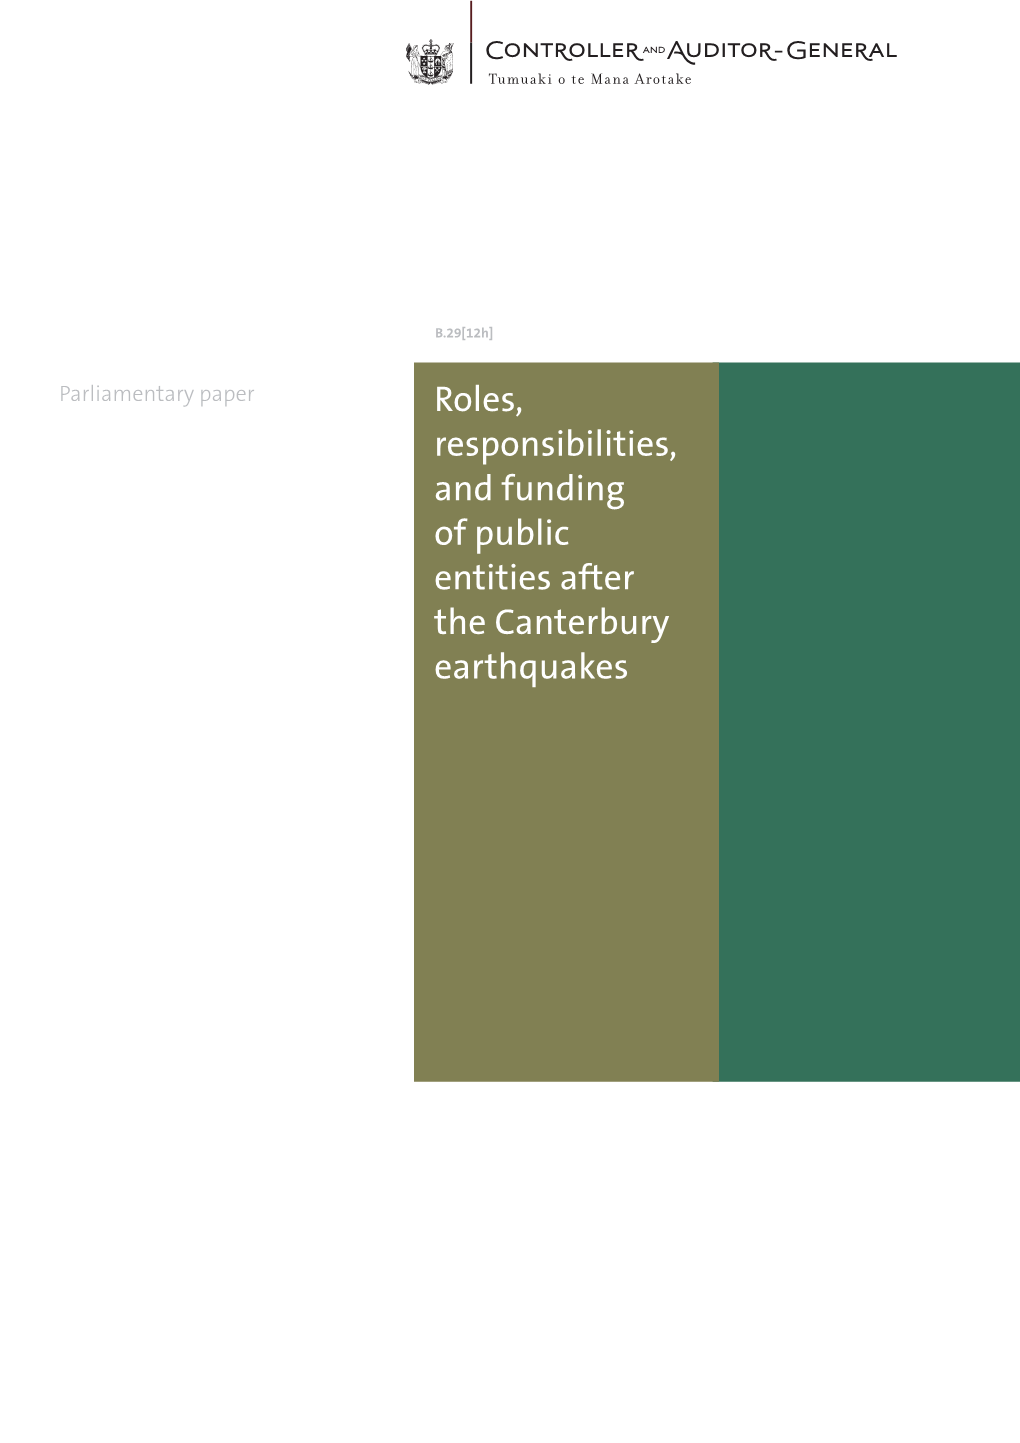 Roles, Responsibilities, and Funding of Public Entities After the Canterbury Earthquakes Oﬃce of the Auditor-General PO Box 3928, Wellington 6140